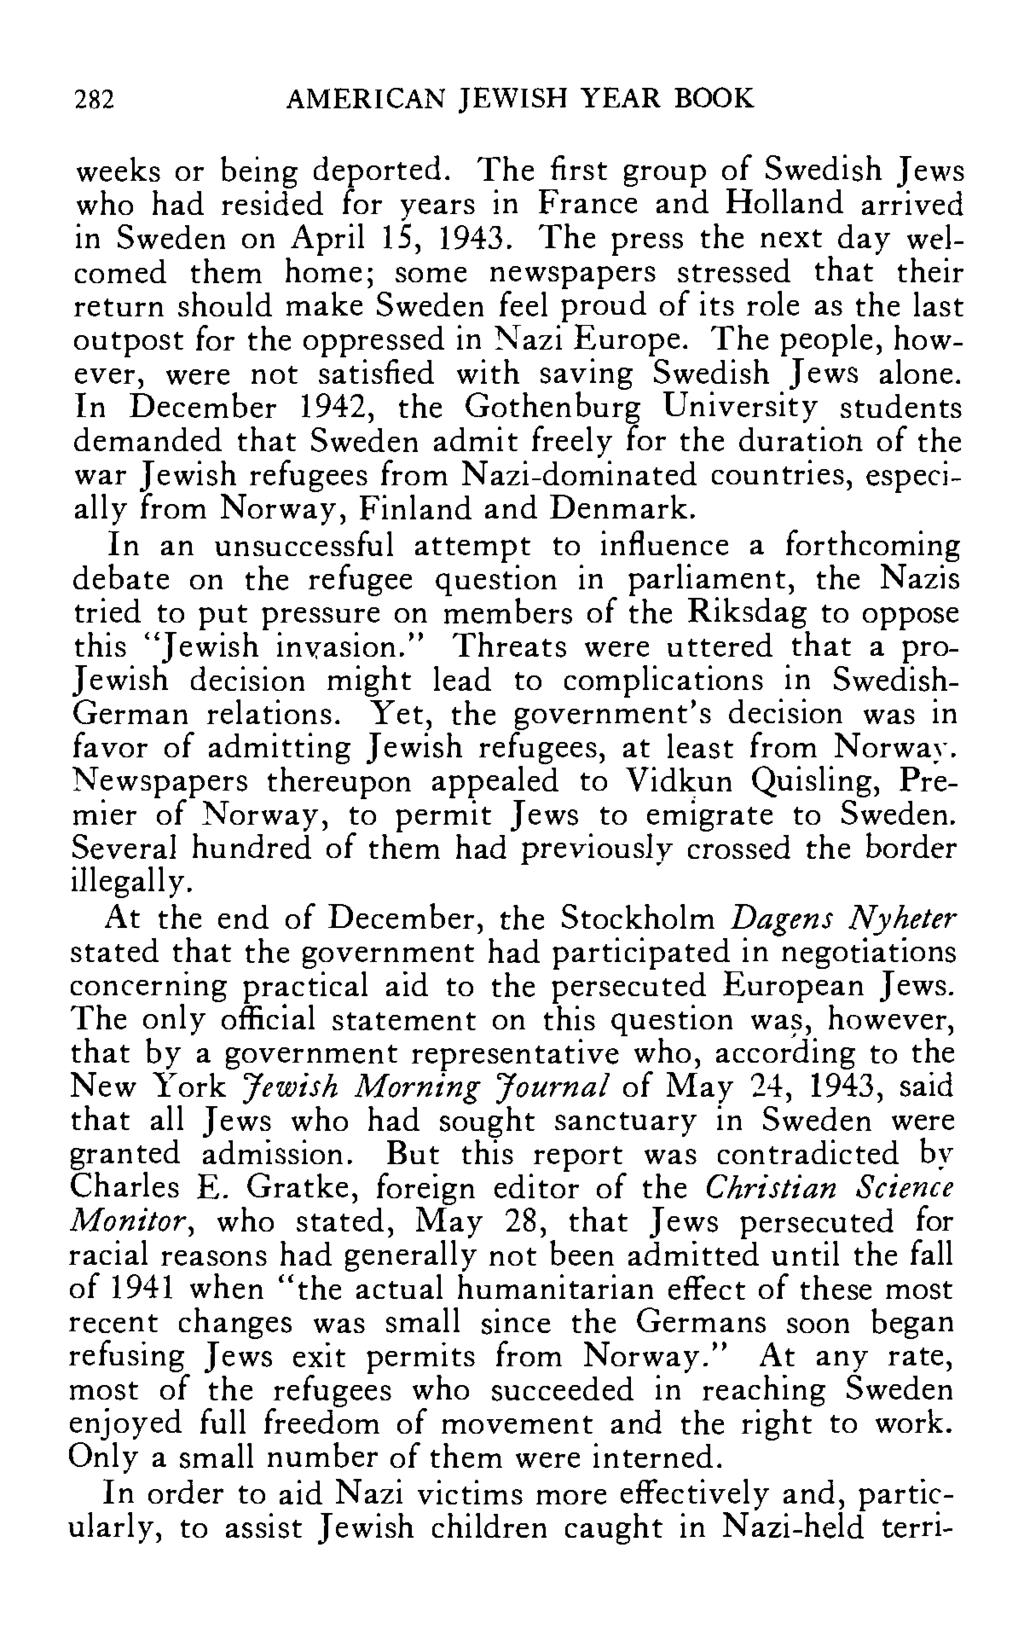 282 AMERICAN JEWISH YEAR BOOK weeks or being deported. The first group of Swedish Jews who had resided for years in France and Holland arrived in Sweden on April 15, 1943.